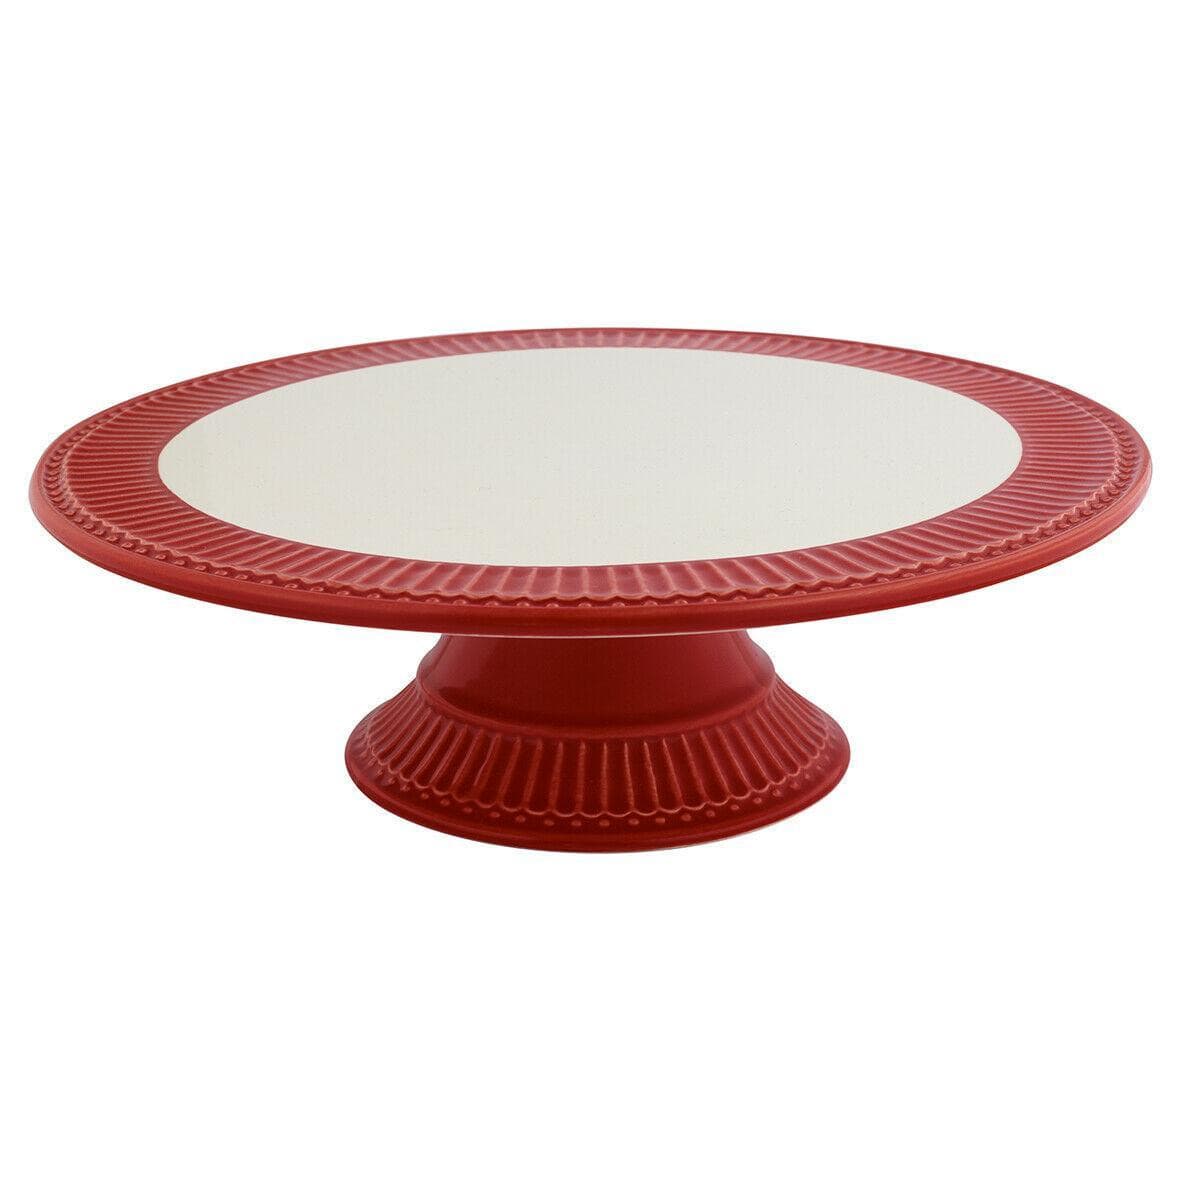 Cake stands, cake plates and food covers